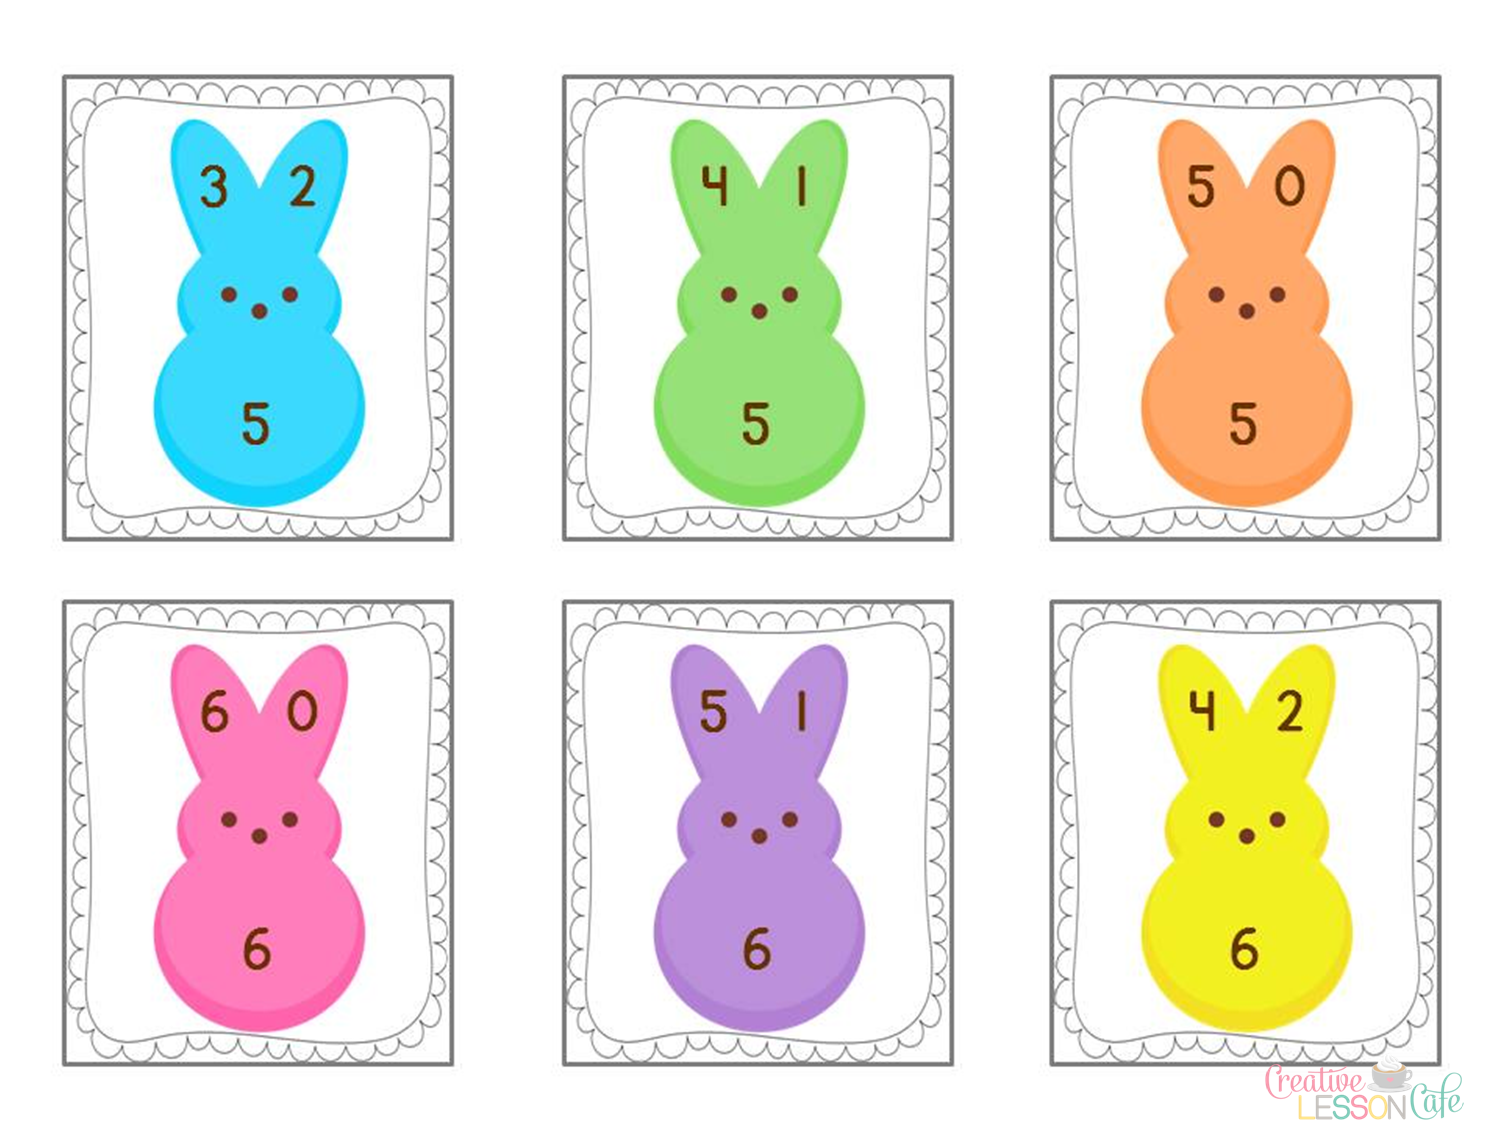 Clip Arts Related To : 9 Plush Peep Bunnies Stuffed Toy. 